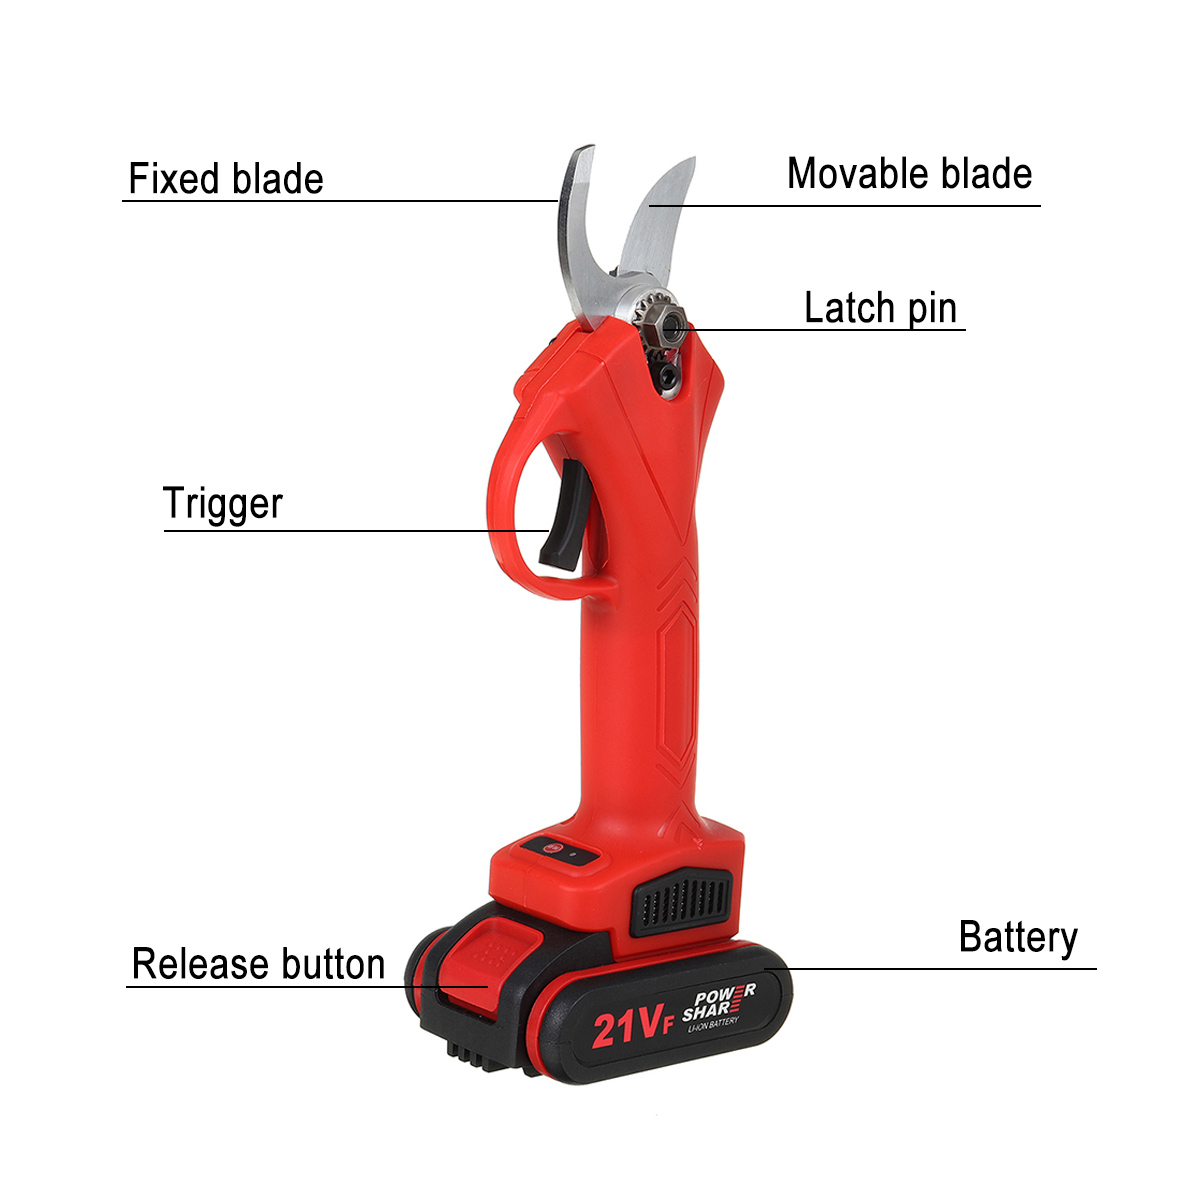 21V-Wireless-25mm-Rechargeable-Electric-Scissors-Branch-Pruning-Shear-Tree-Cutting-Tools-W-2-Battery-1749247-4